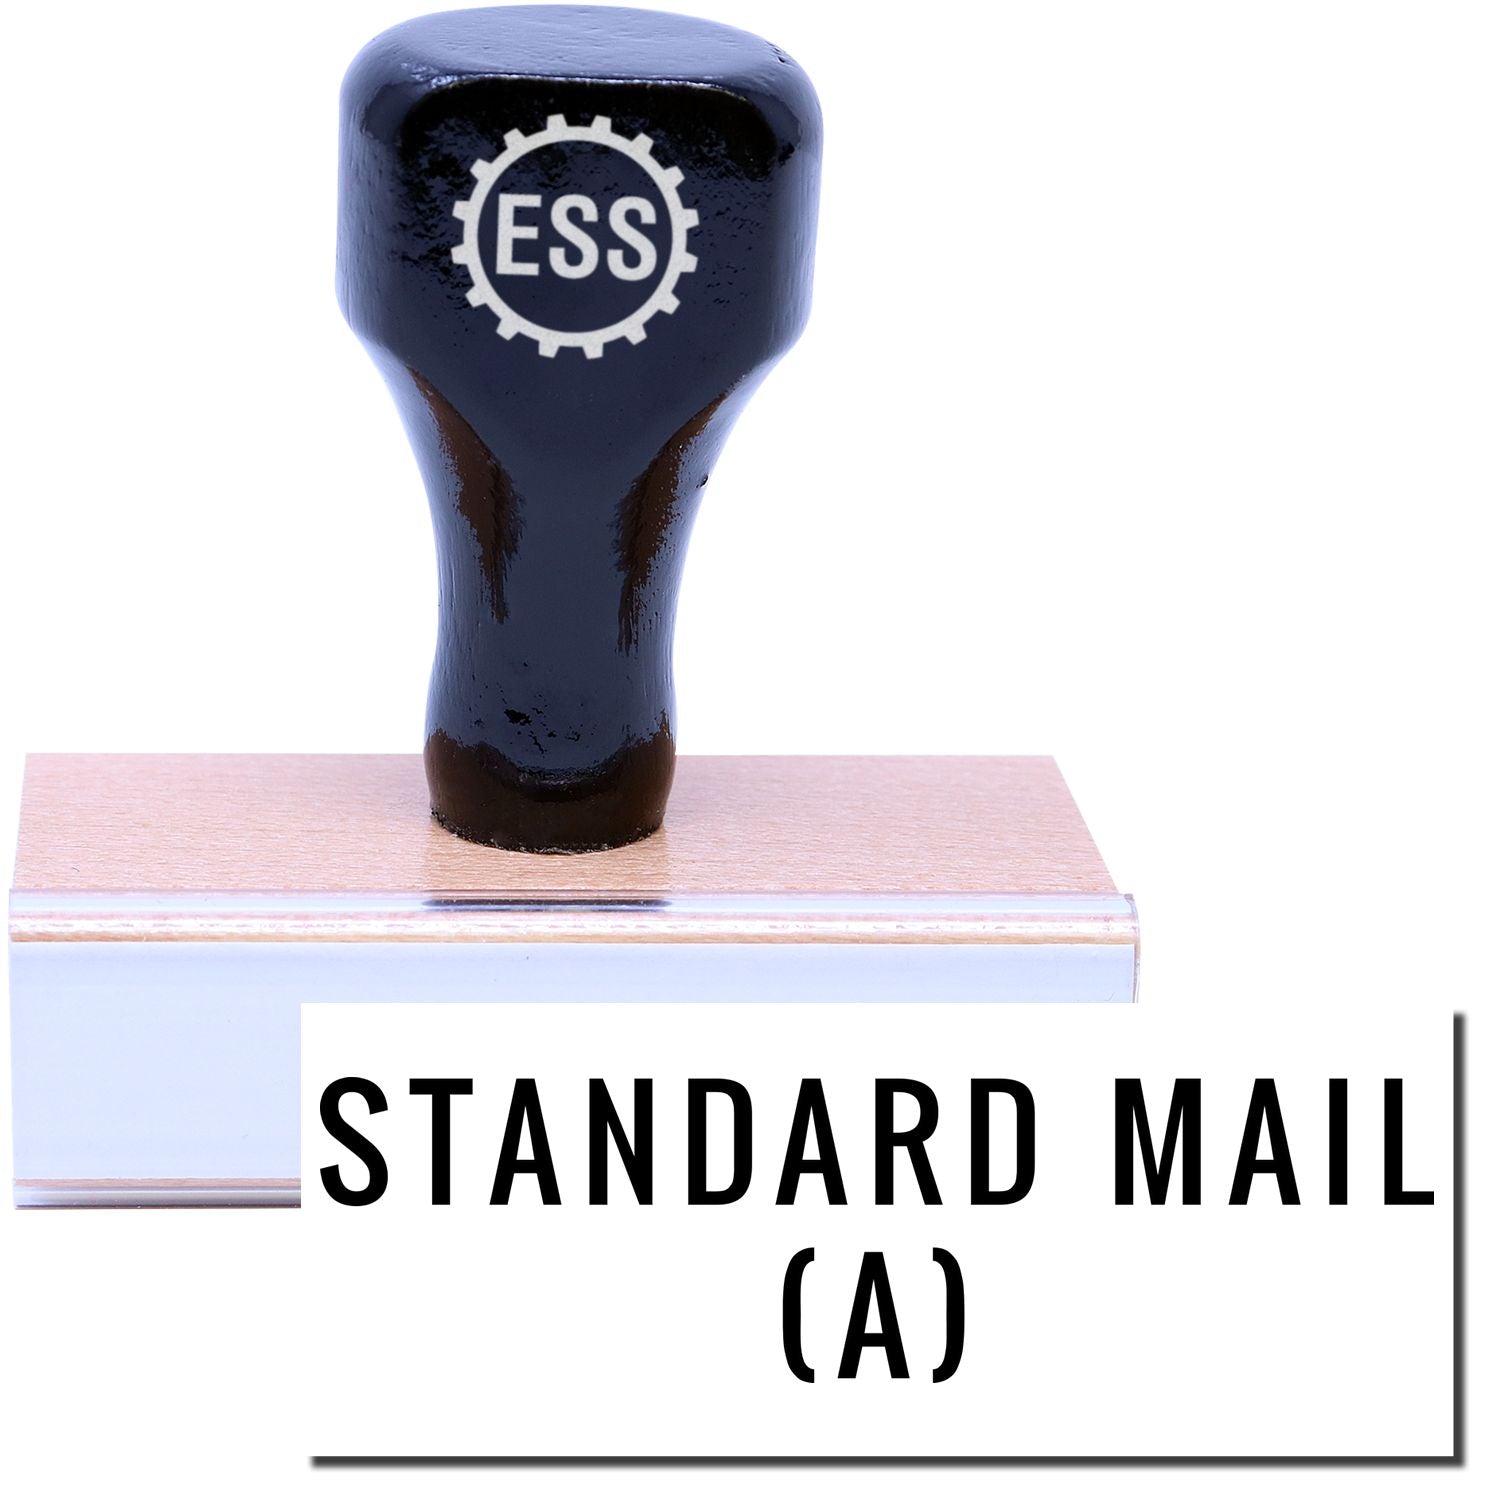 A stock office rubber stamp with a stamped image showing how the text "STANDARD MAIL (A)" in a large font is displayed after stamping.